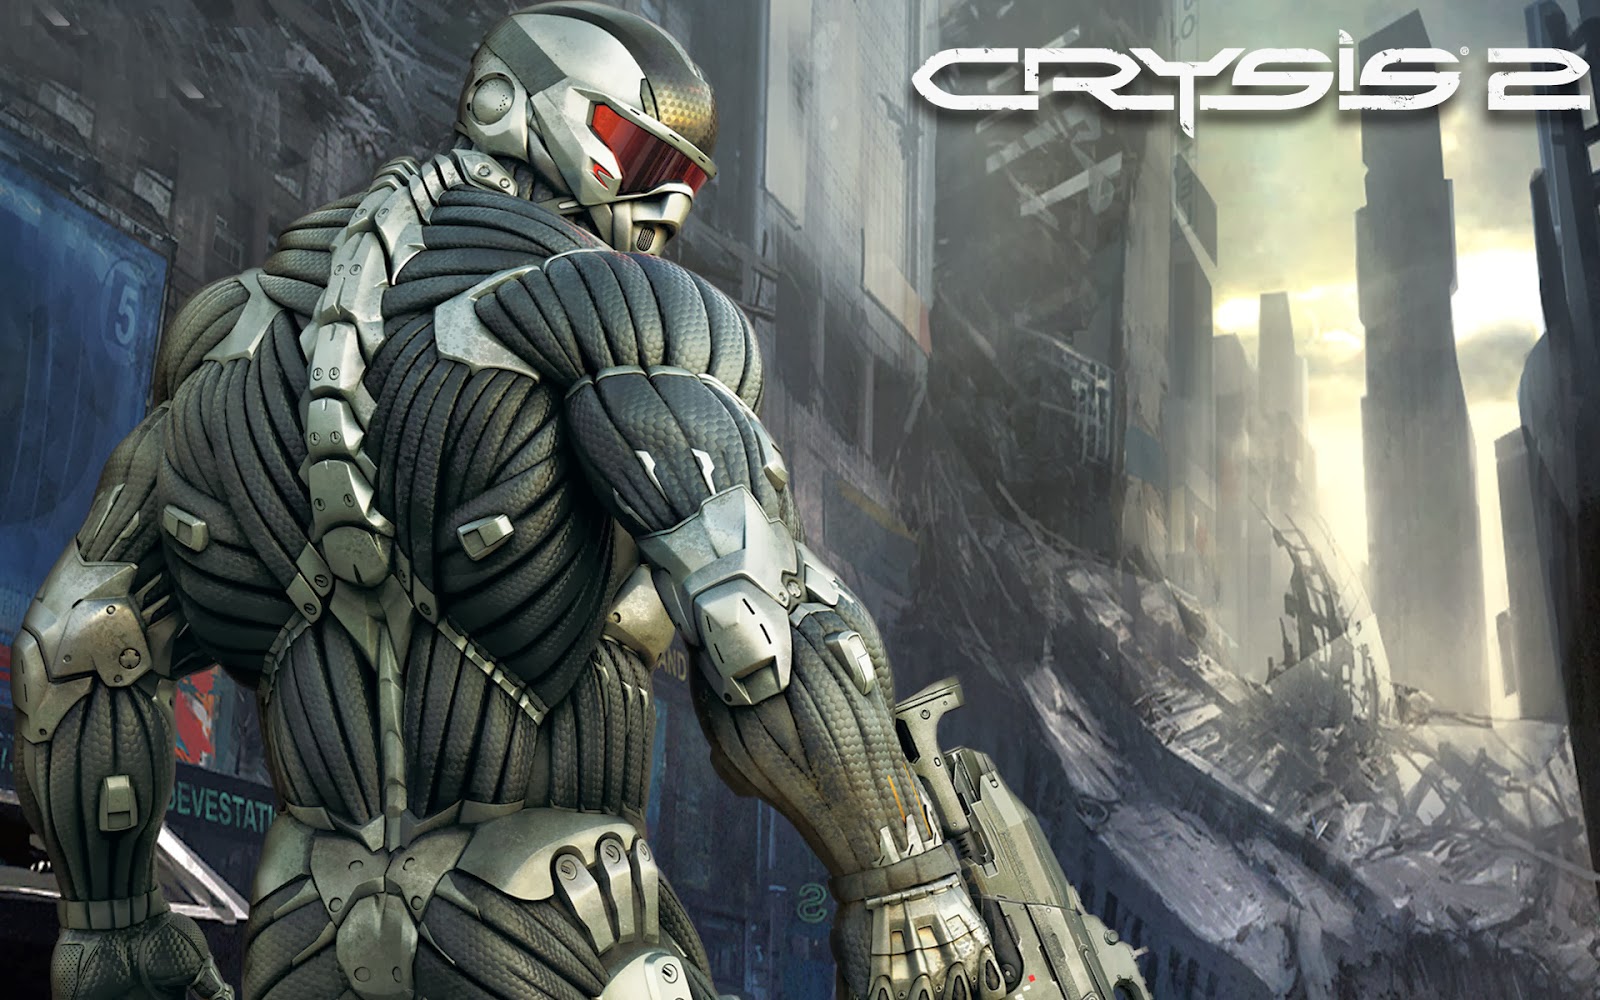 crysis 2 activation code keygengolkes